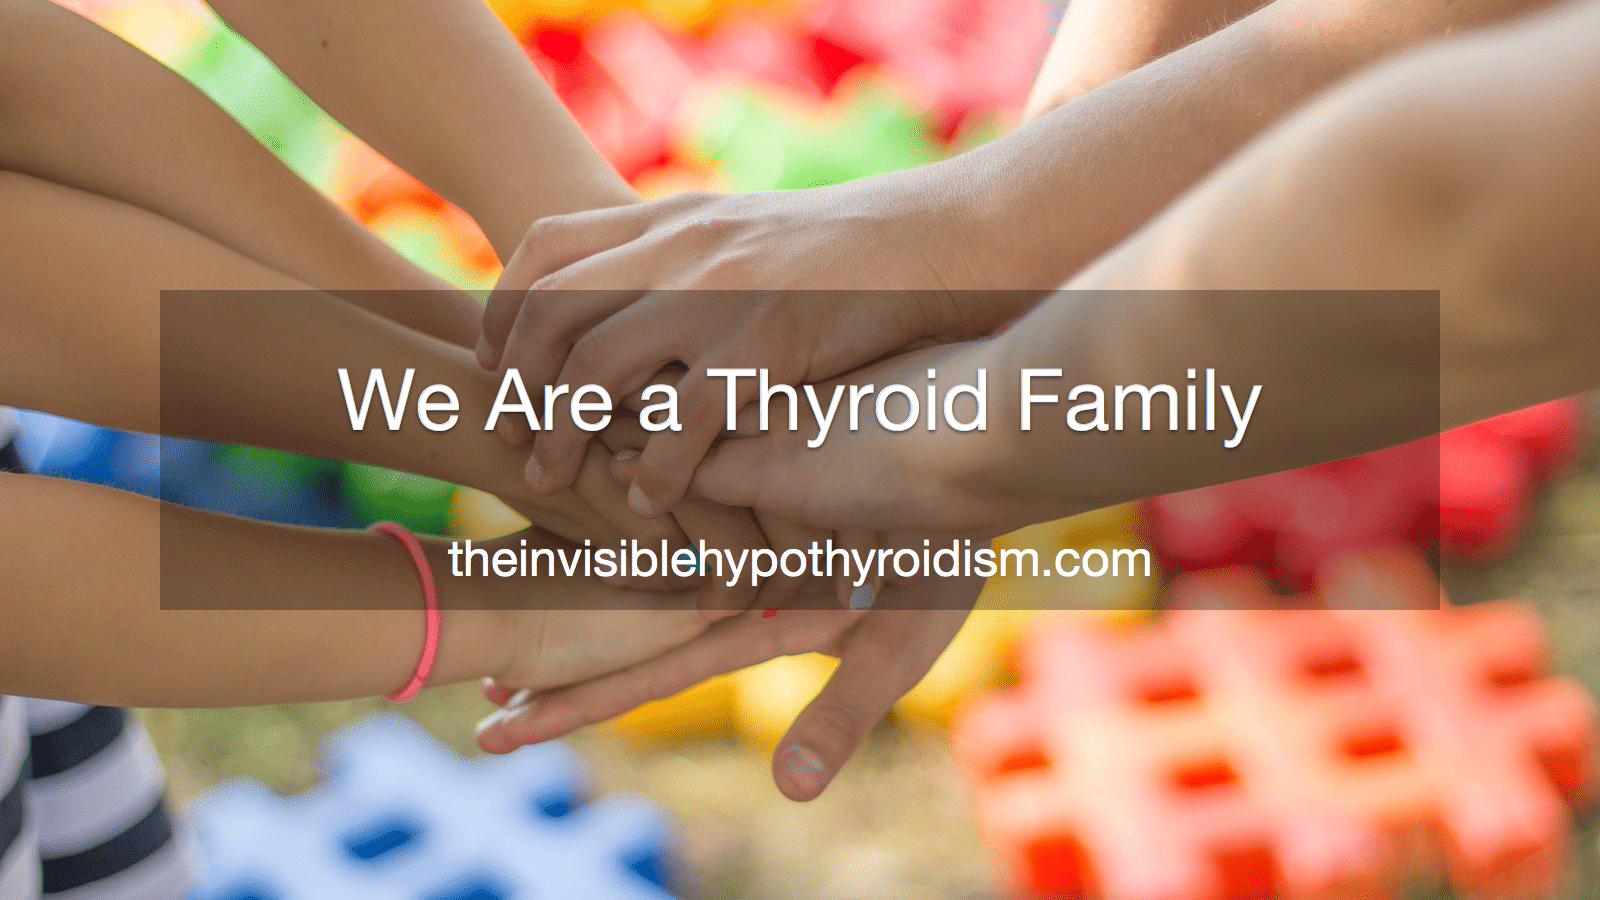 We Are a Thyroid Family